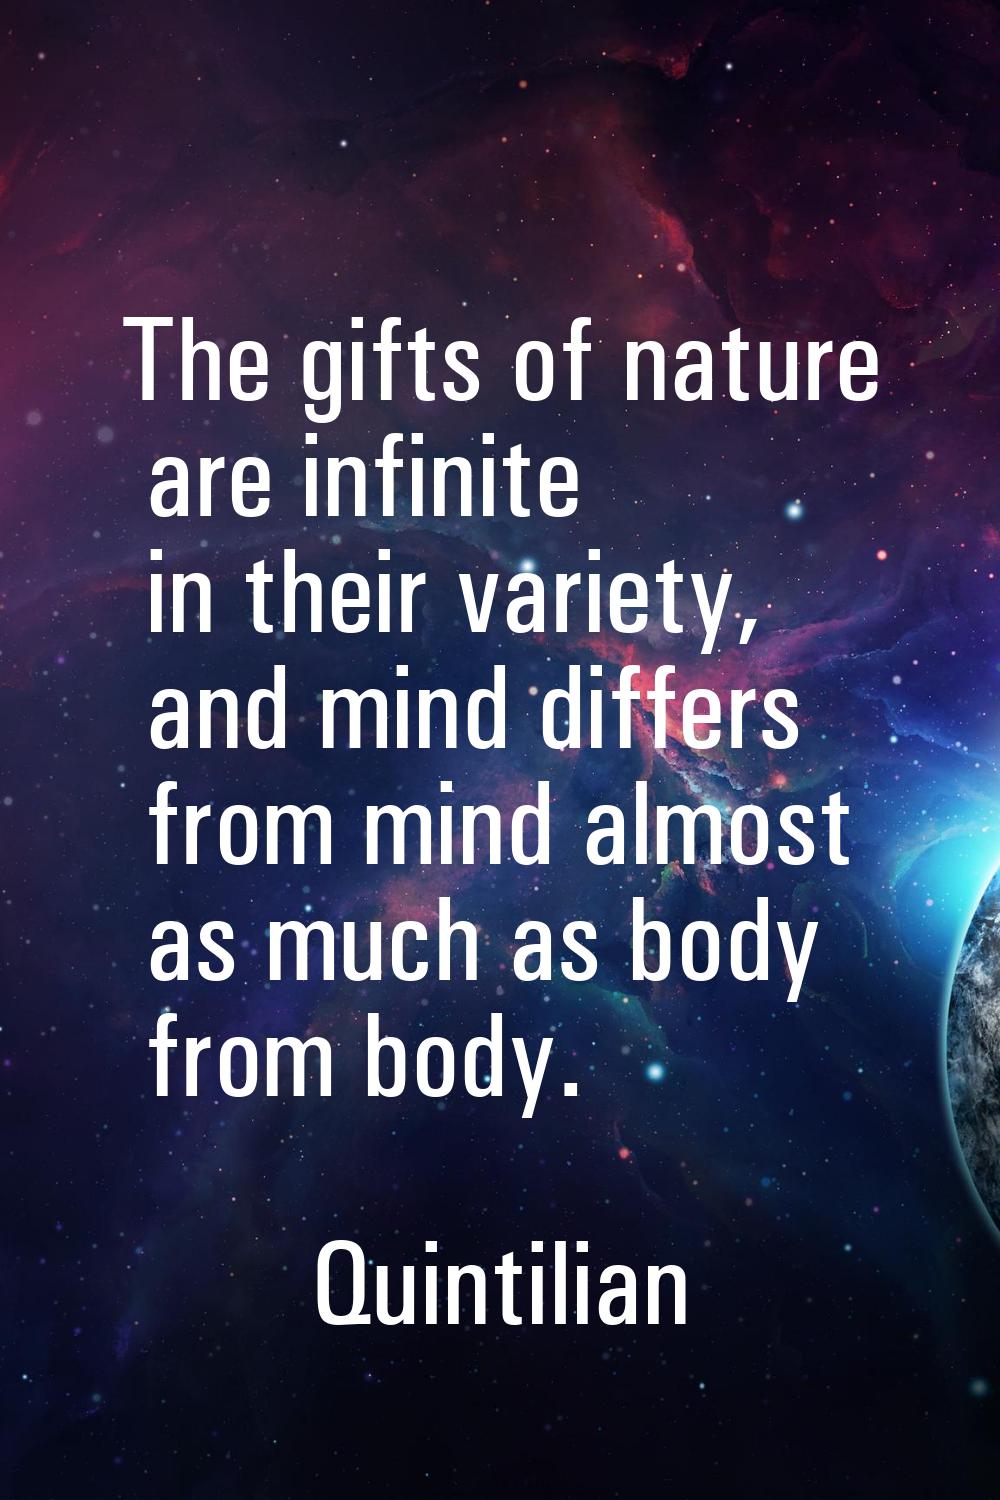 The gifts of nature are infinite in their variety, and mind differs from mind almost as much as bod